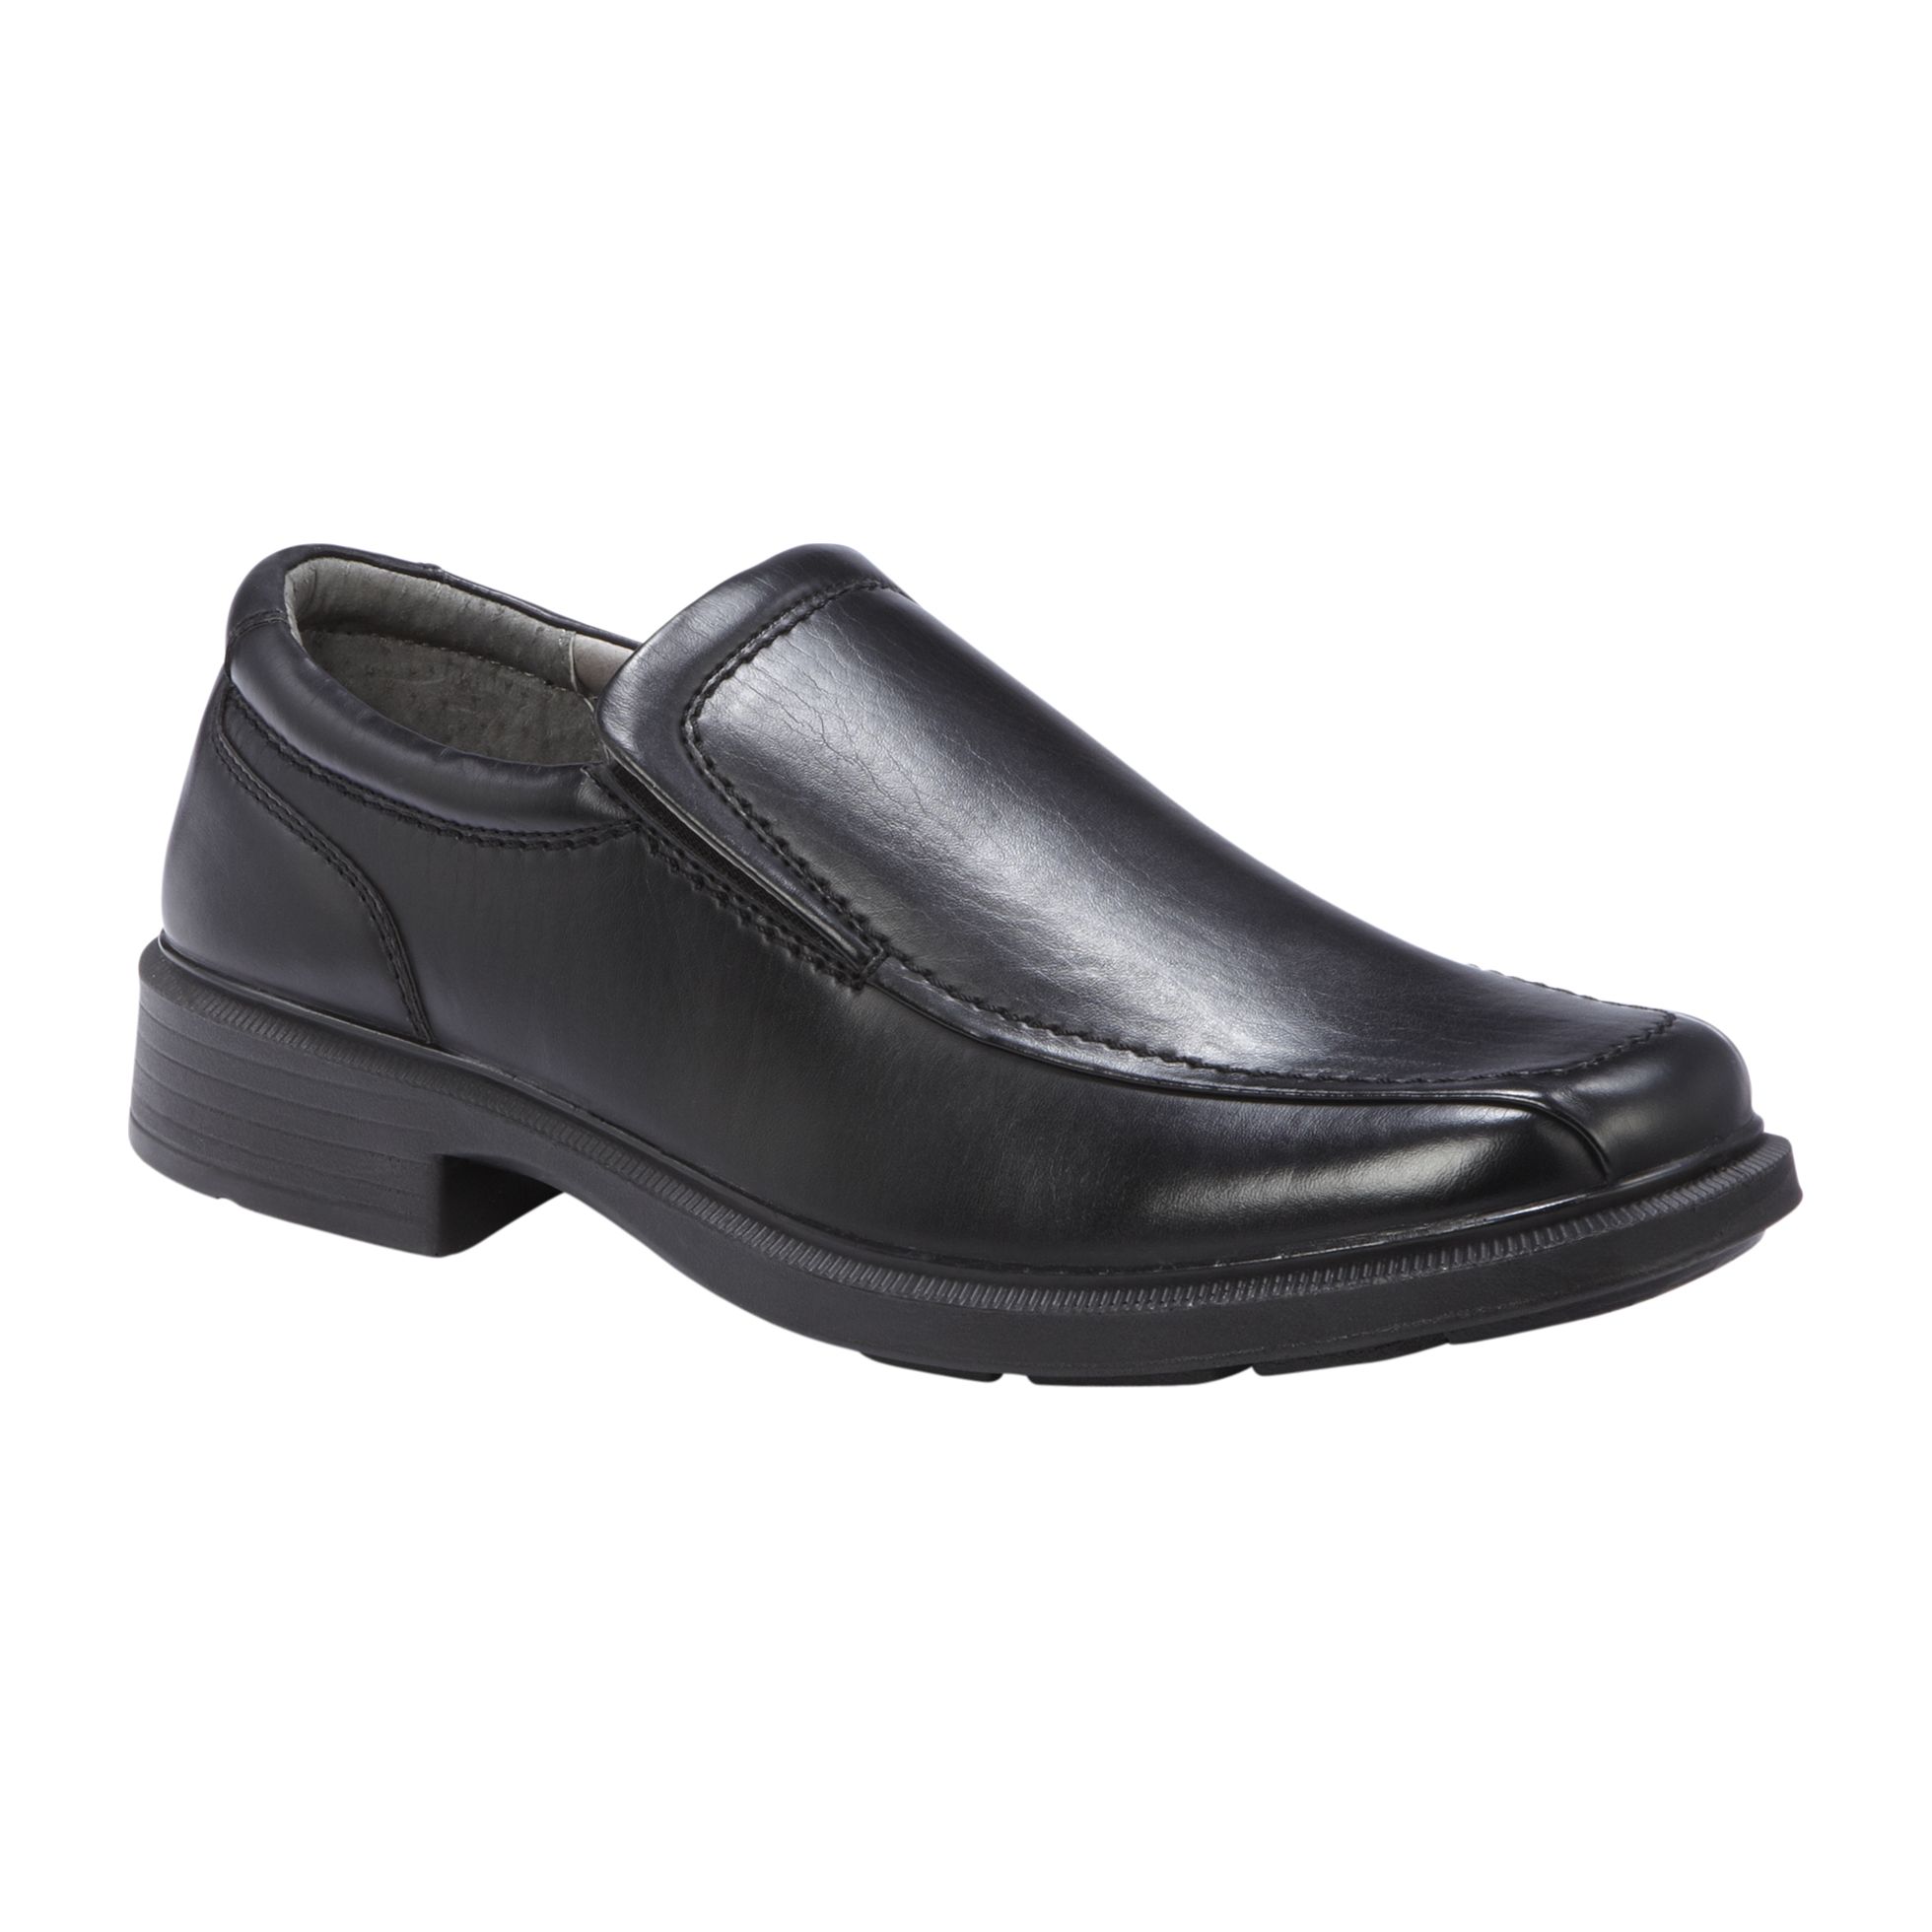 Men's 902 Collection Greenpoint Casual Slip On Shoe - Black